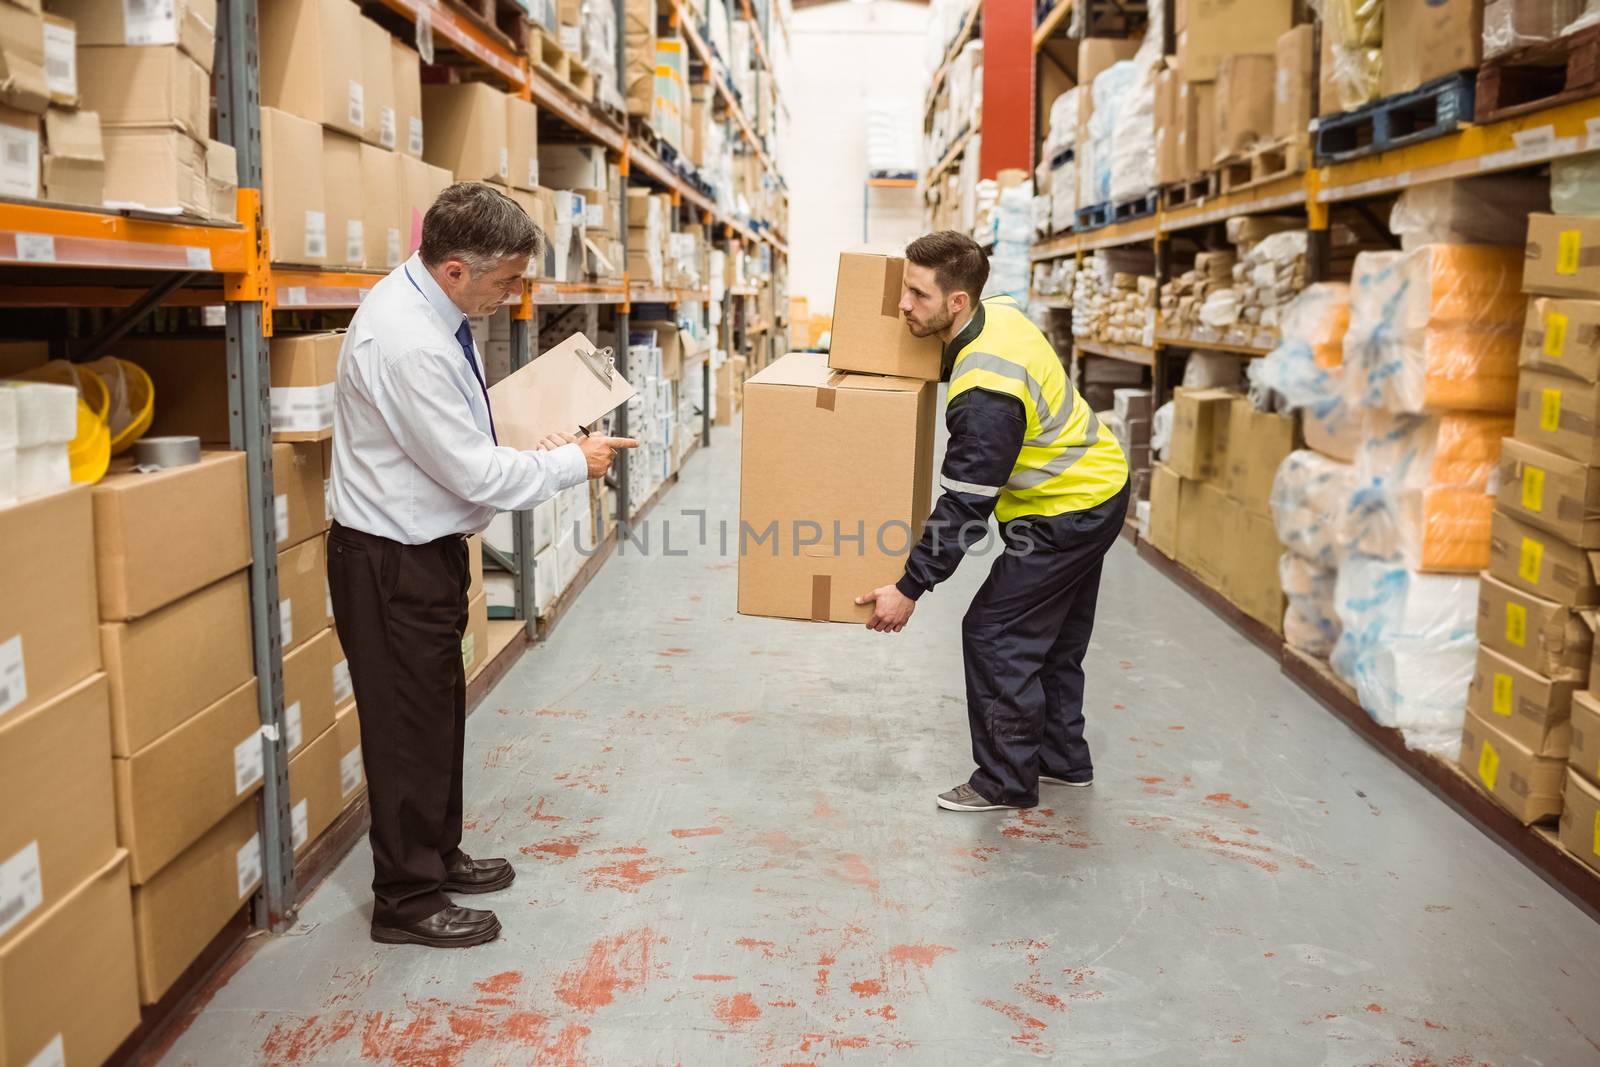 Manager watching worker carrying boxes by Wavebreakmedia